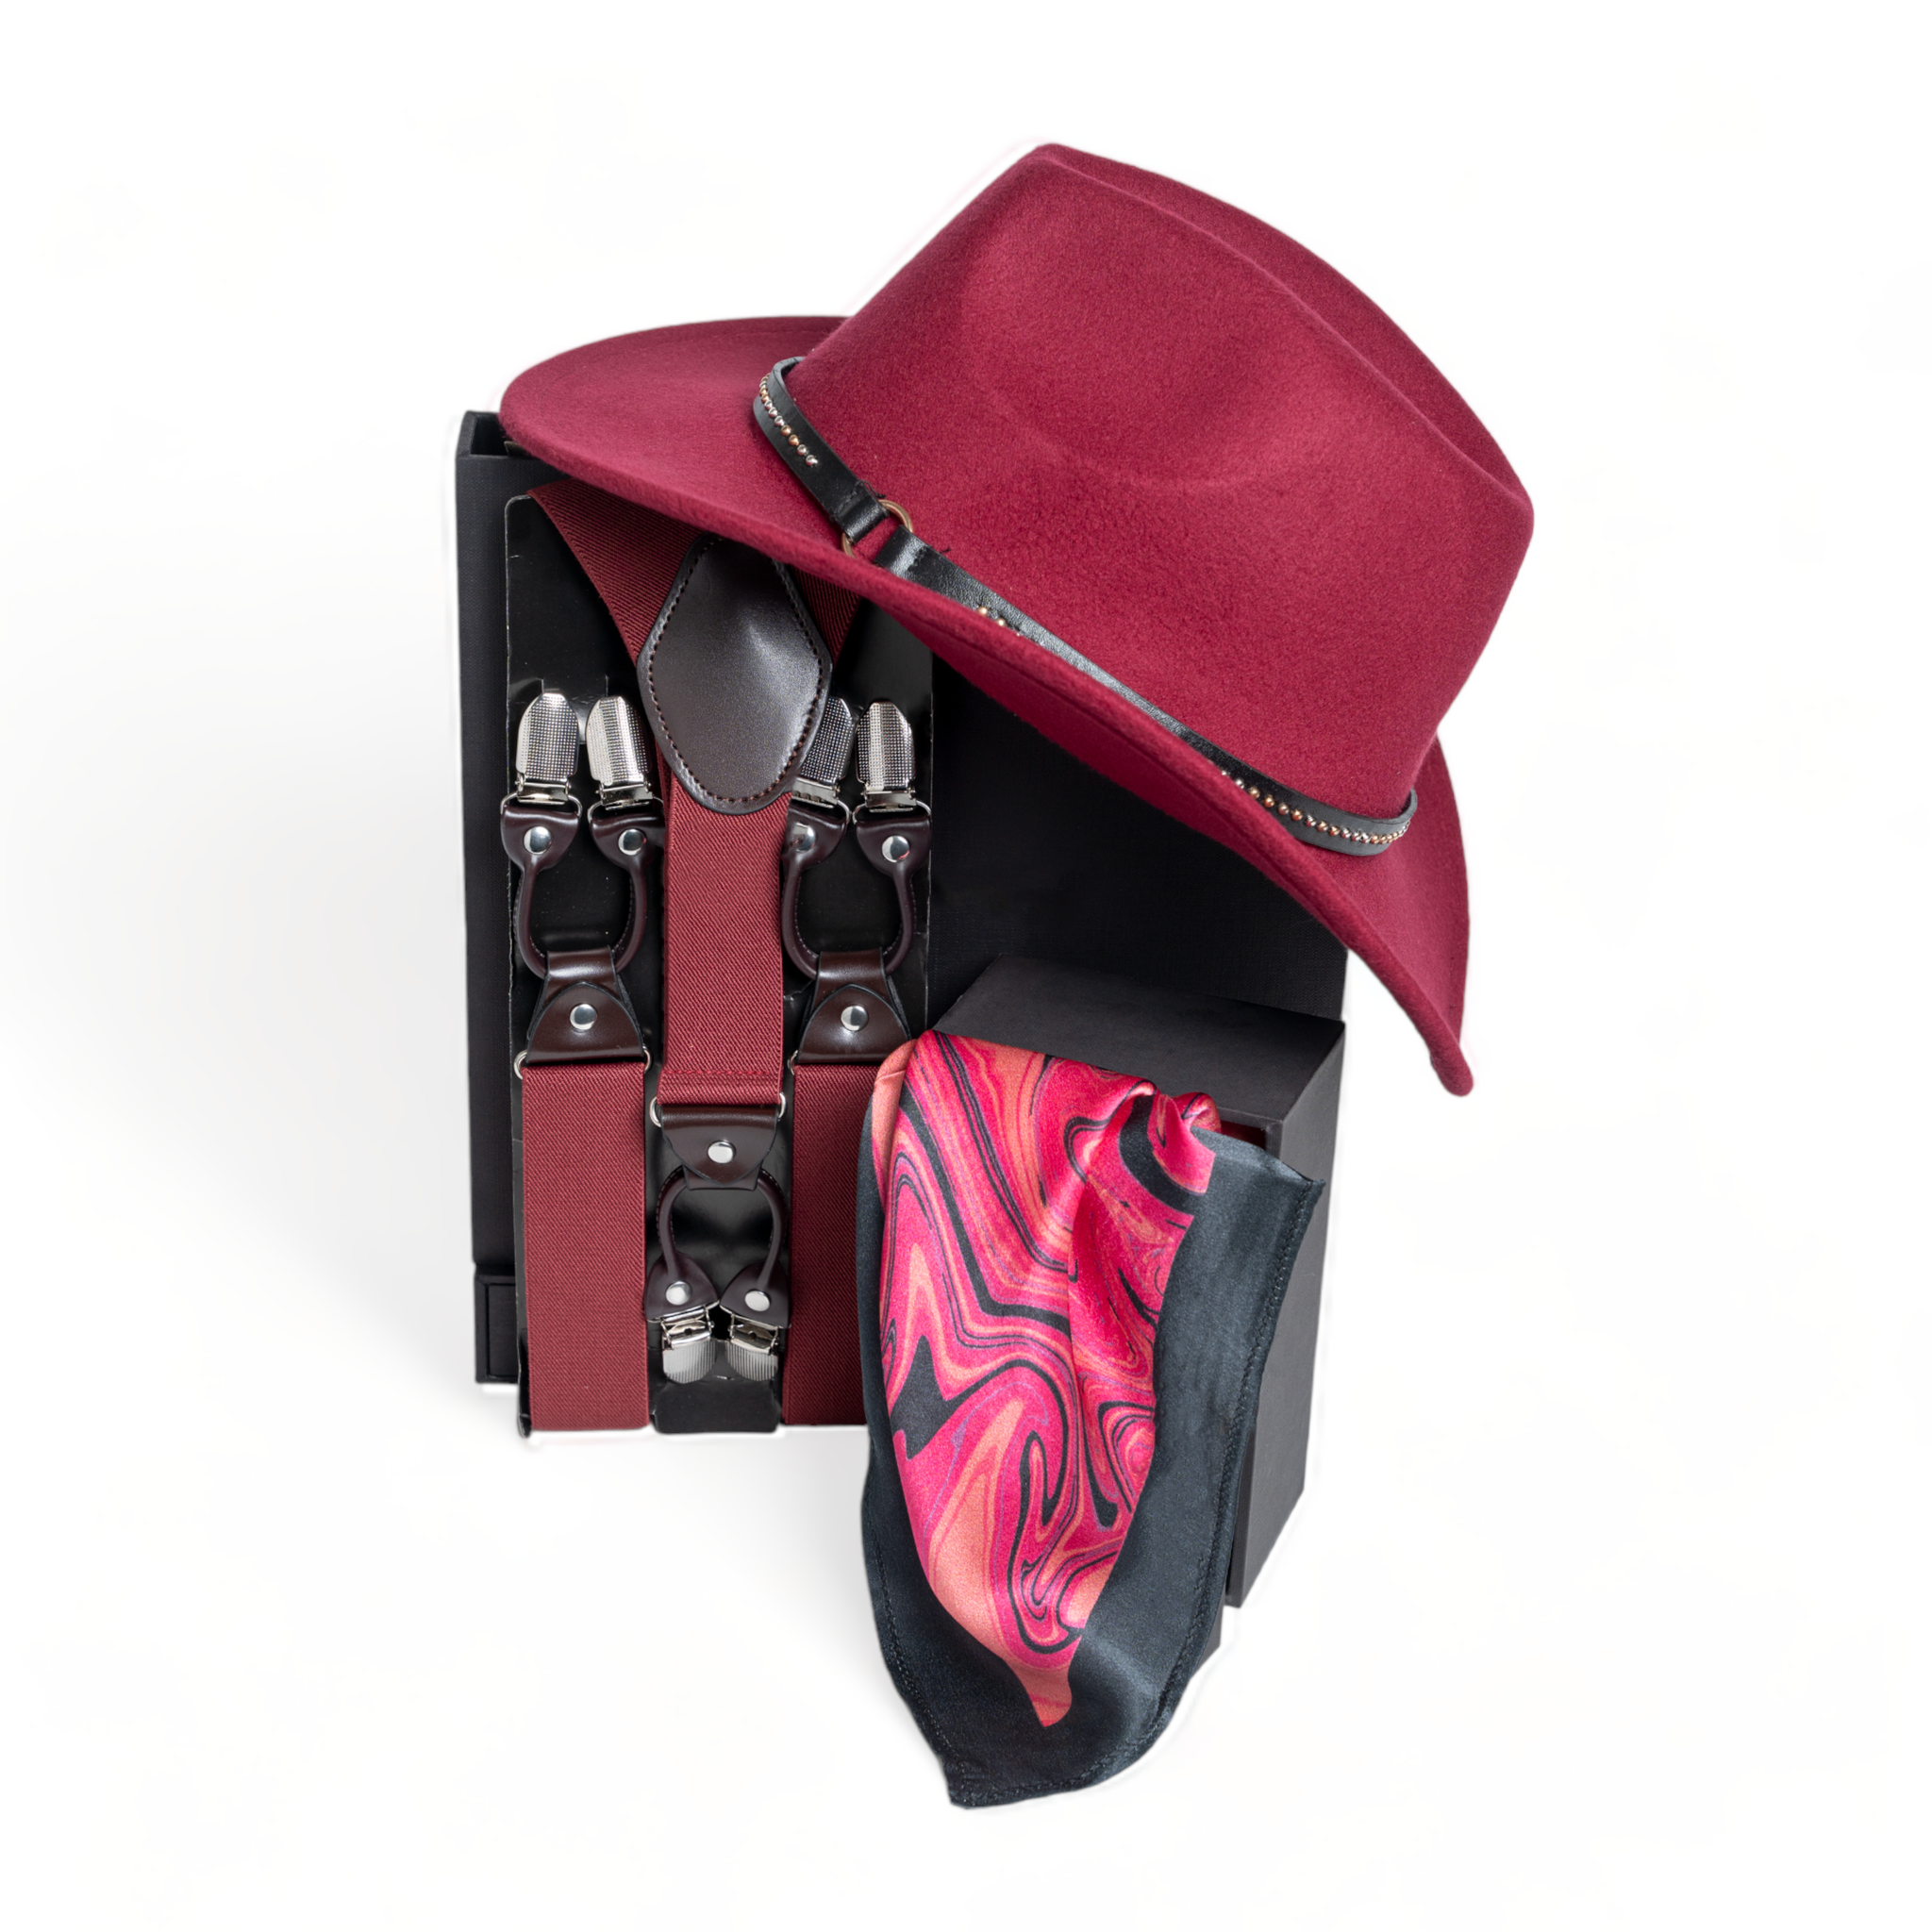 Chokore Special 3-in-1 Gift Set for Him (Burgundy Suspenders, Cowboy Hat, & Pocket Square)